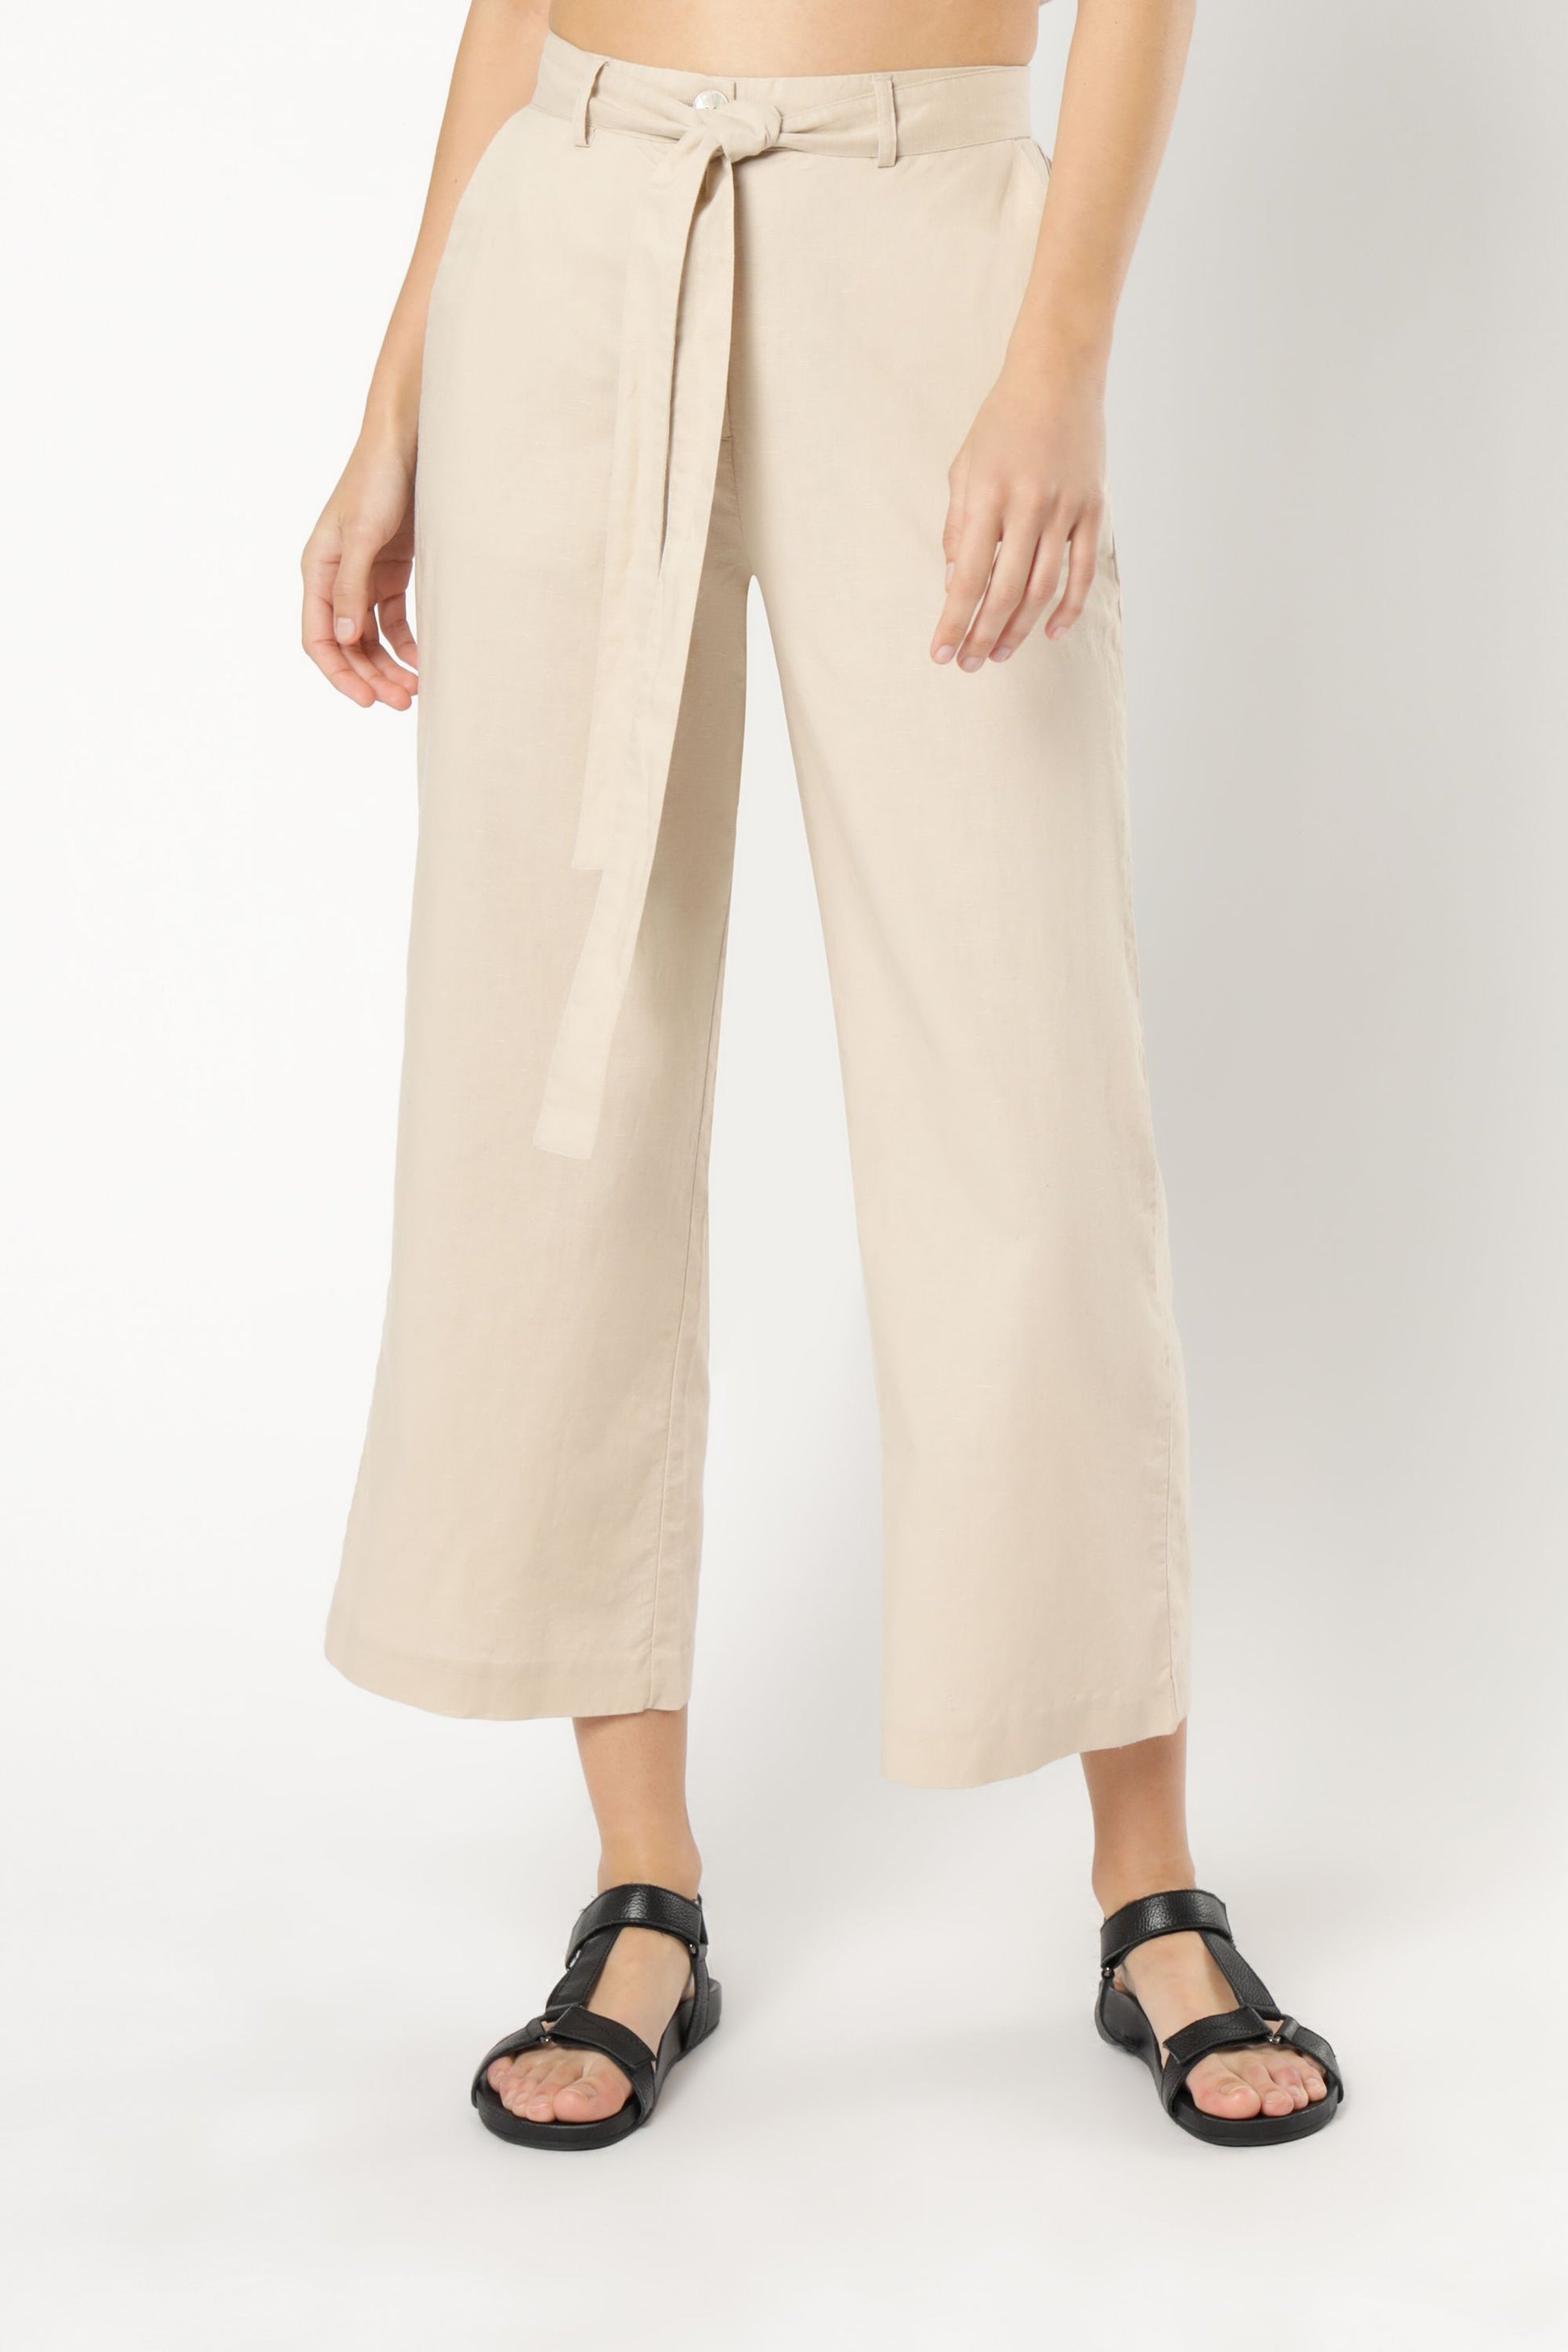 Nude Lucy brynn wide leg pant sand pants